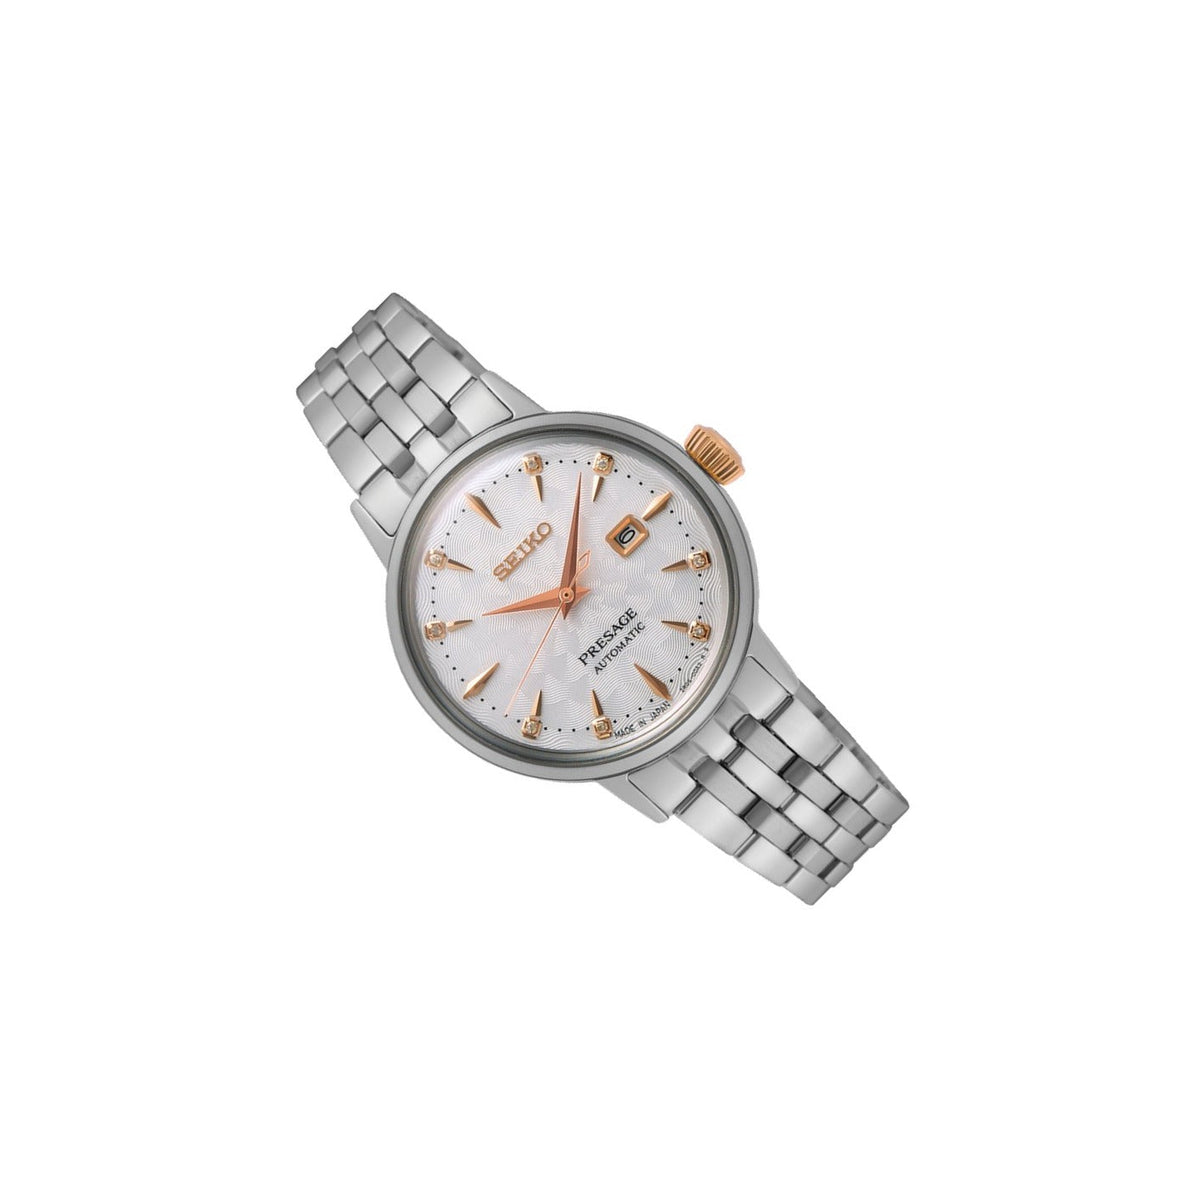 Seiko Presage Cocktail Time Clover Club Automatic Womens Watch SRE009